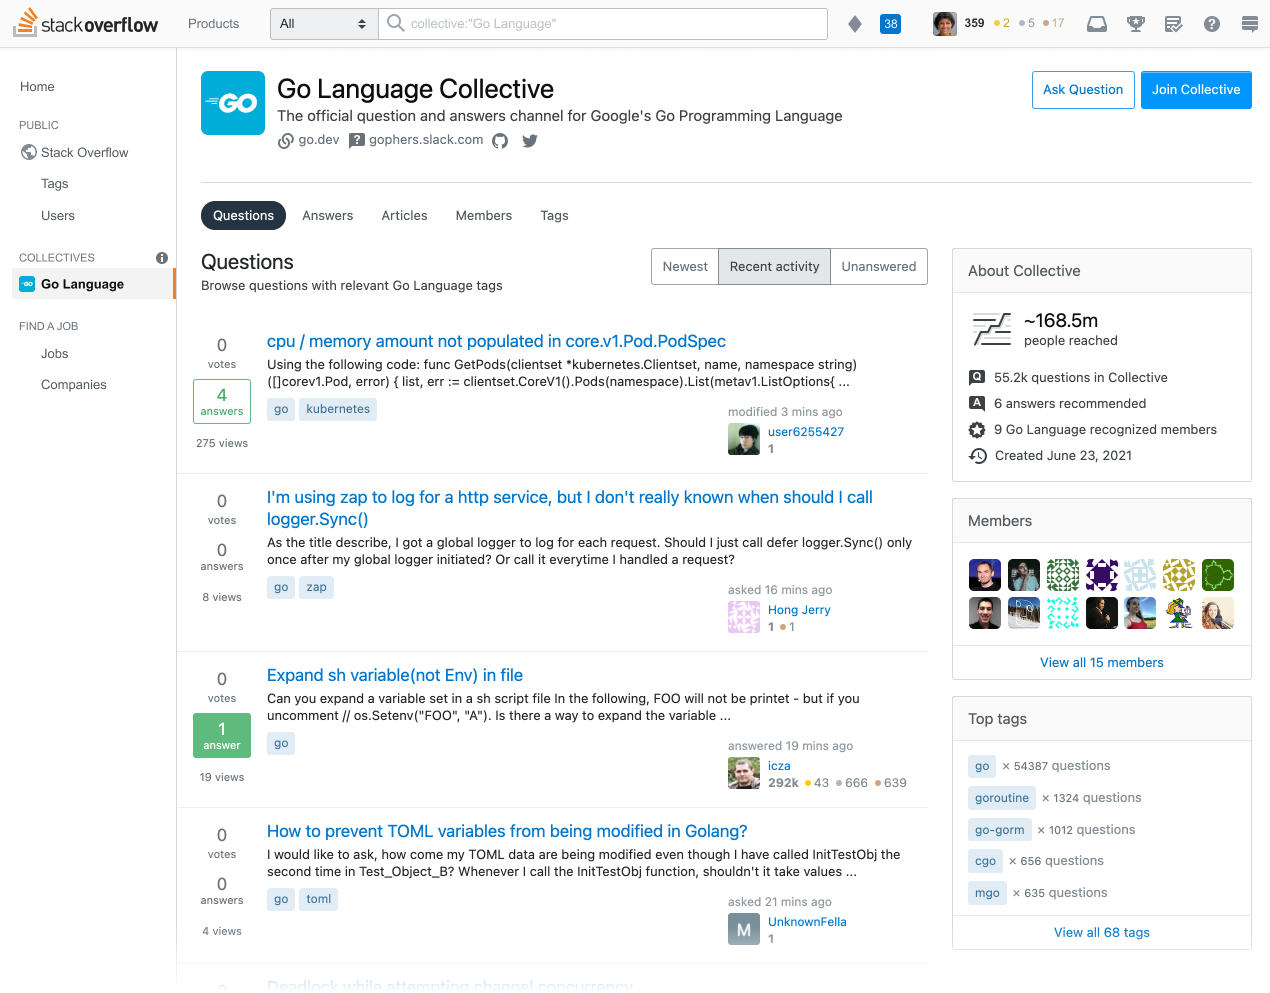 Go Collective on Stack Overflow web page